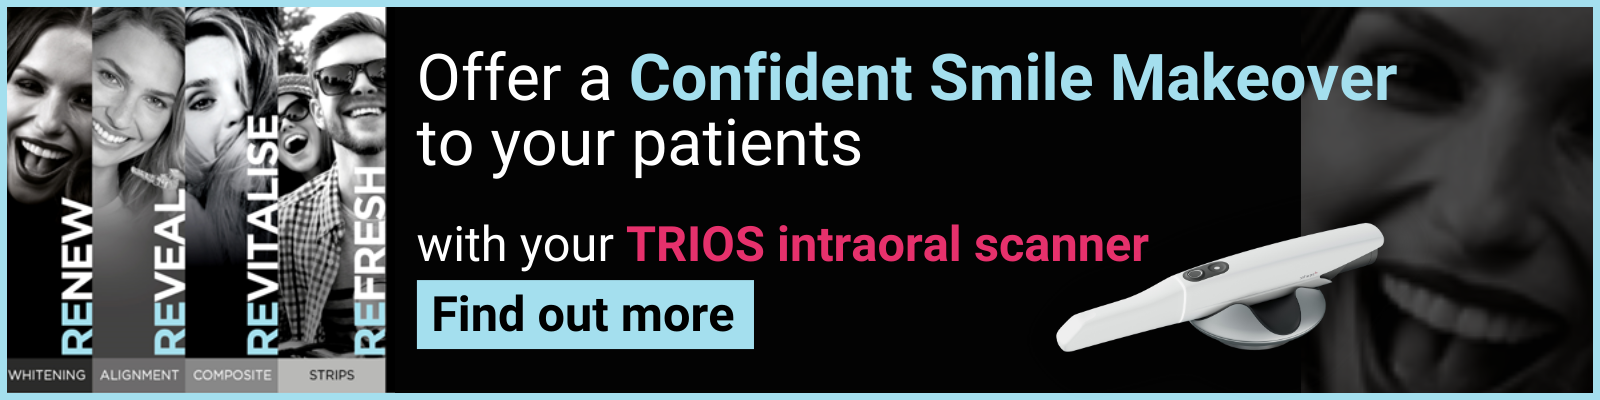 Offer a Confident Smile Makeover to your patients with your TRIOS intraoral scanner - Find out more